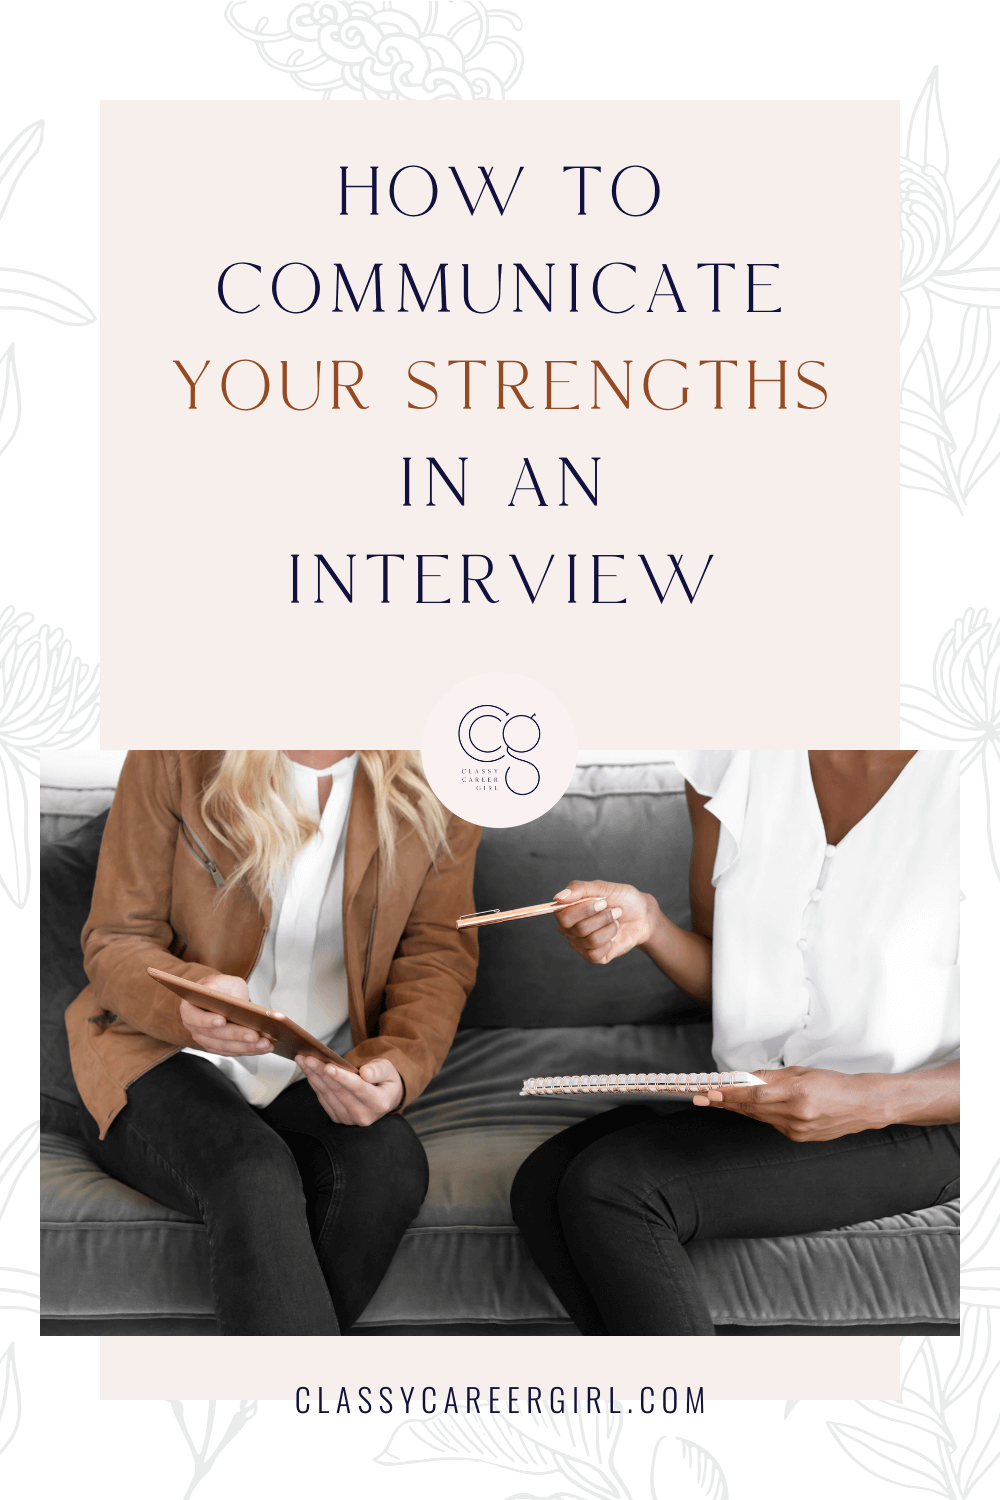 How To Communicate Your Strengths in an Interview